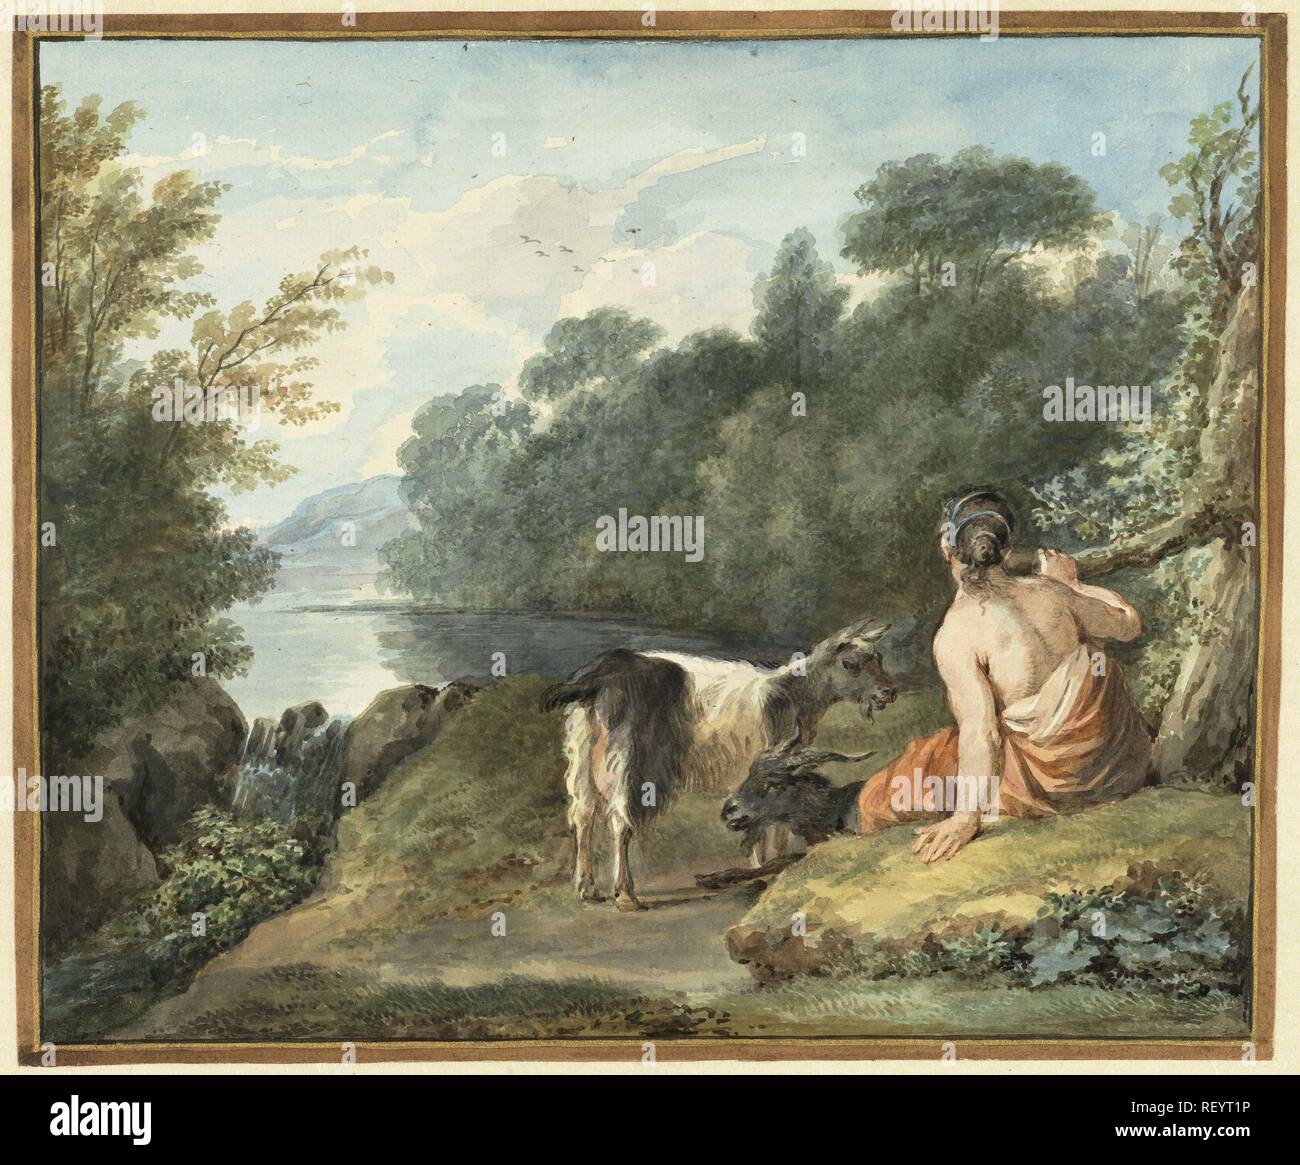 Shepherdess with goats in a landscape with a lake. Draughtsman: Aert Schouman. After Simon van der Does. Dating: 1781. Measurements: h 192 mm × w 229 mm. Museum: Rijksmuseum, Amsterdam. Stock Photo